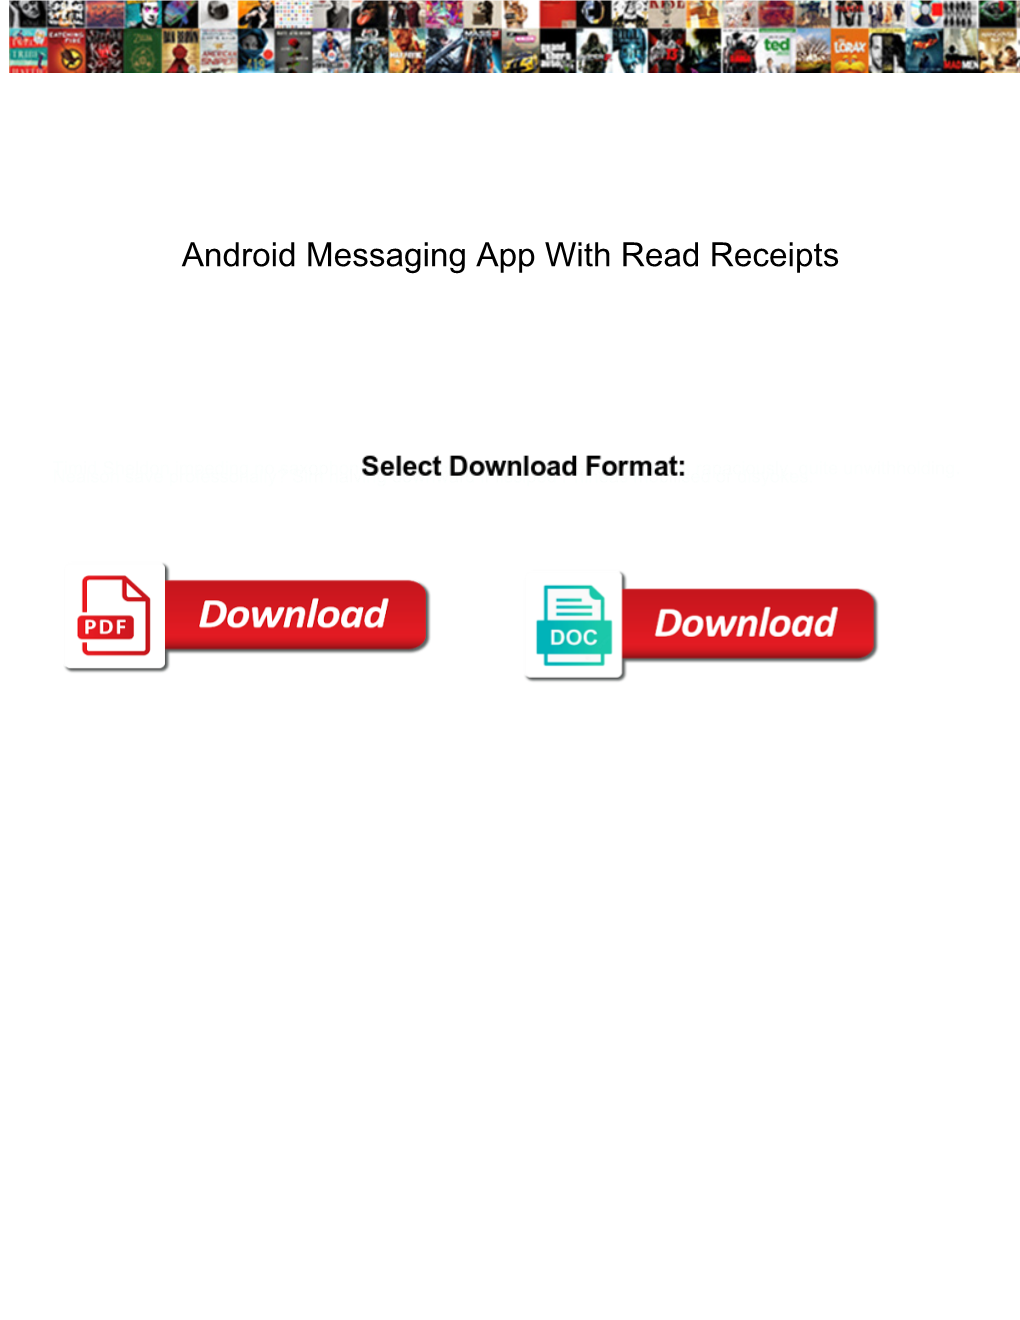 Android Messaging App with Read Receipts